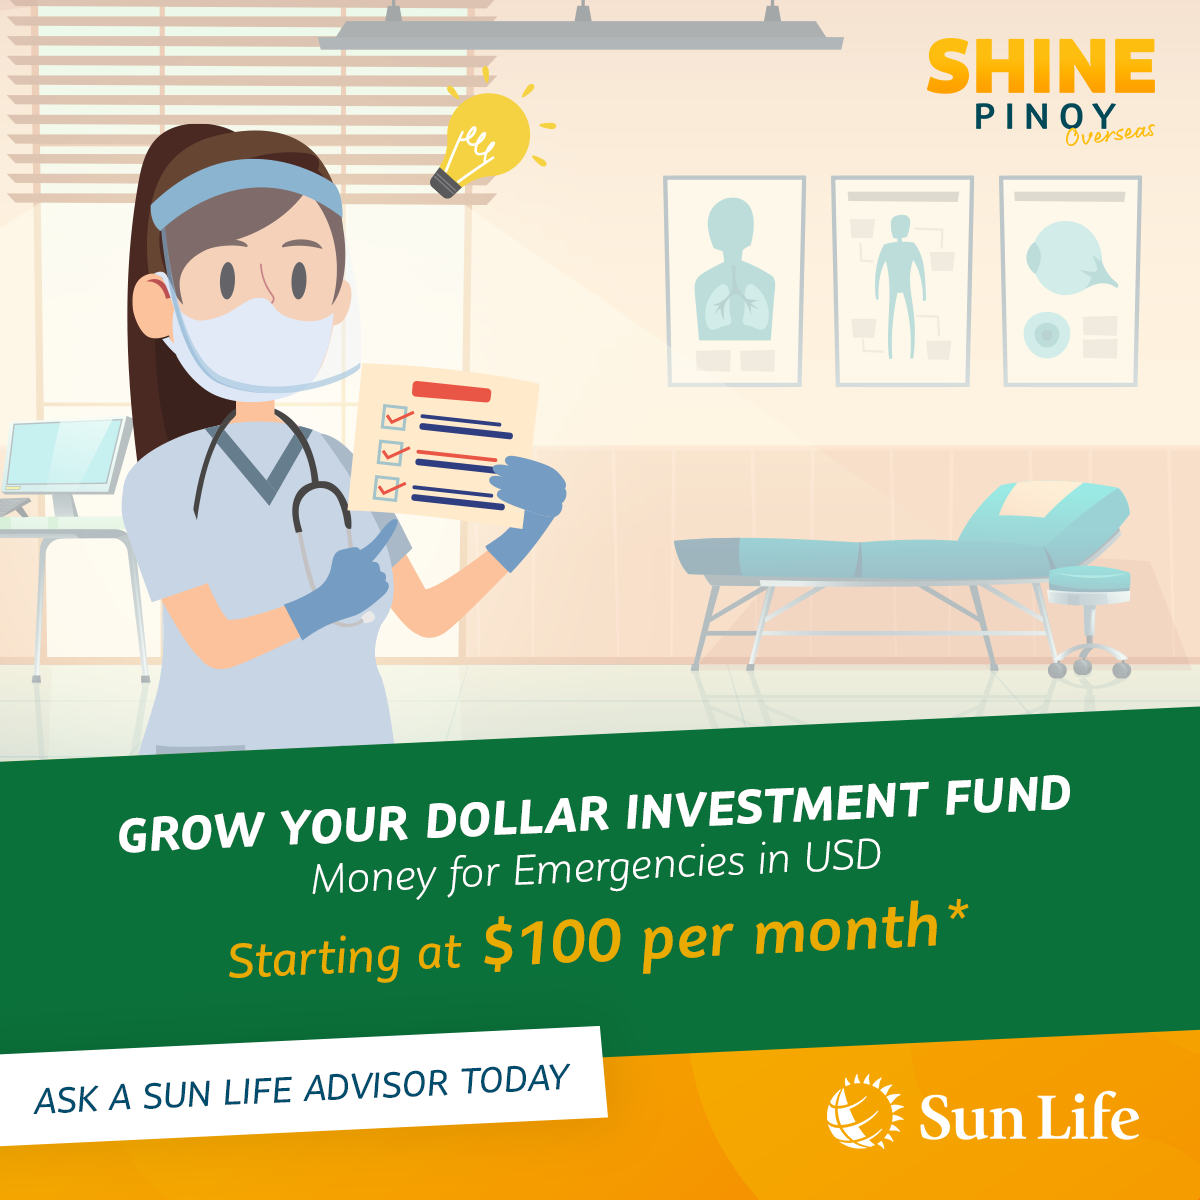 Grow Your Dollar Investment Fund | Shine Pinoy OFW Emergency Fund